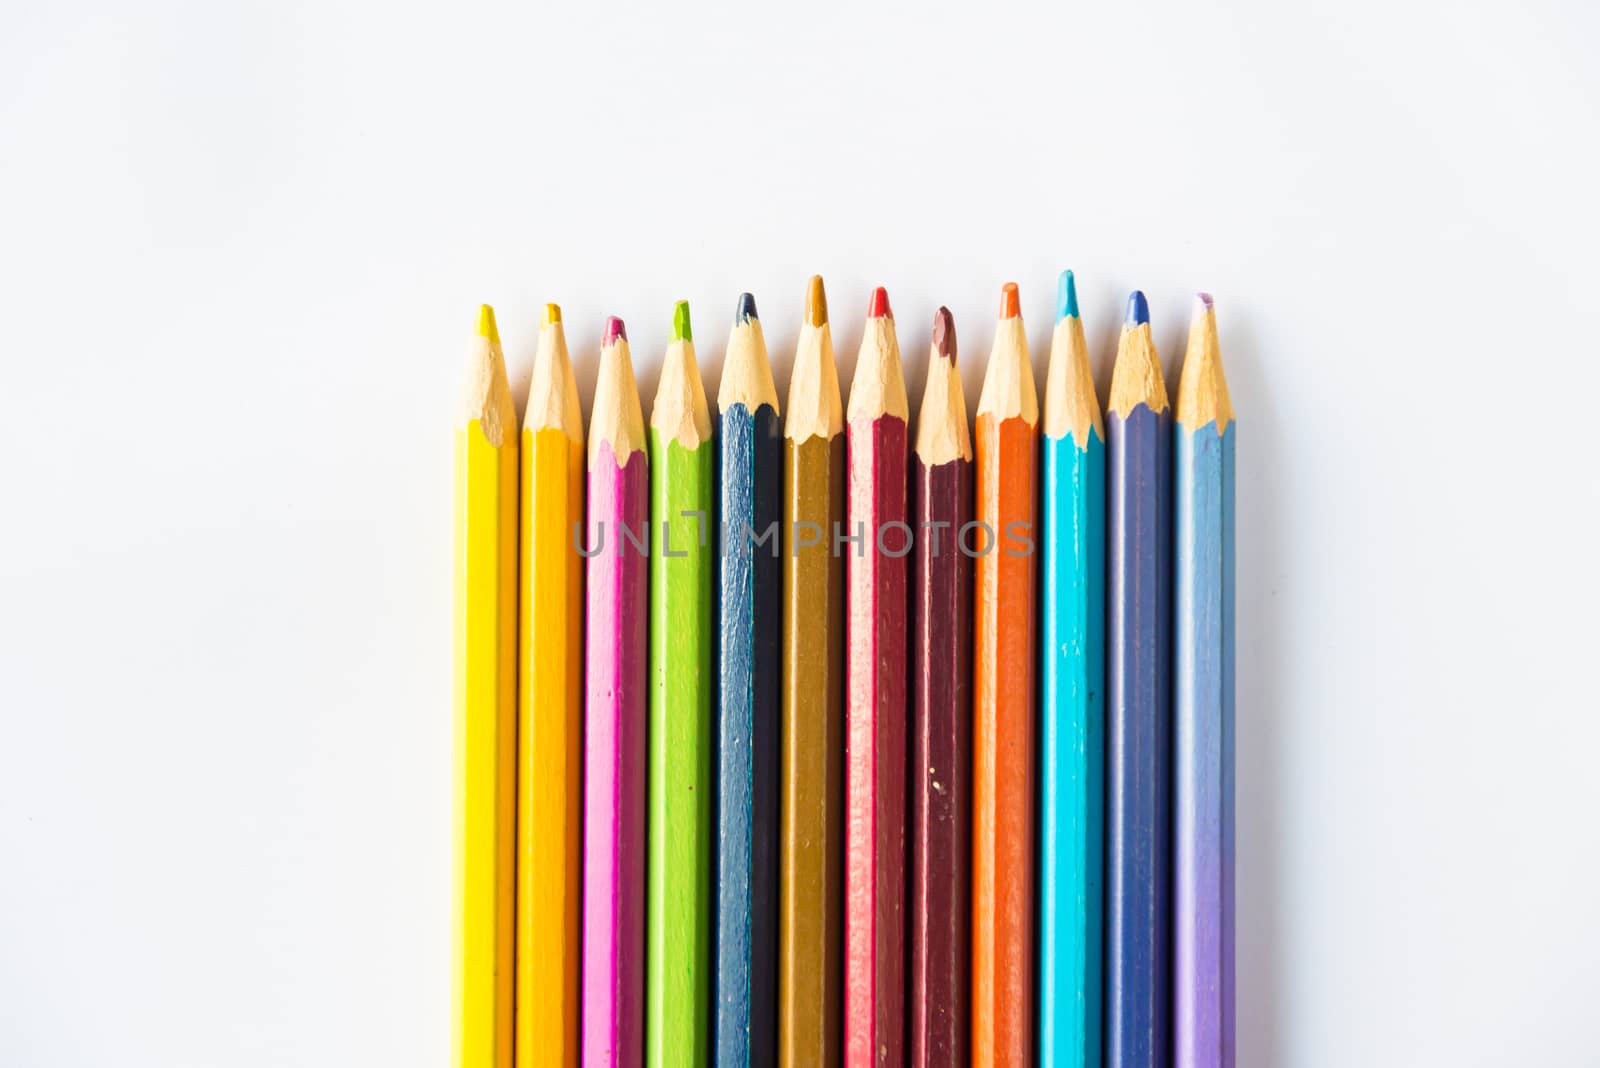 Colour pencils on white background, isolated